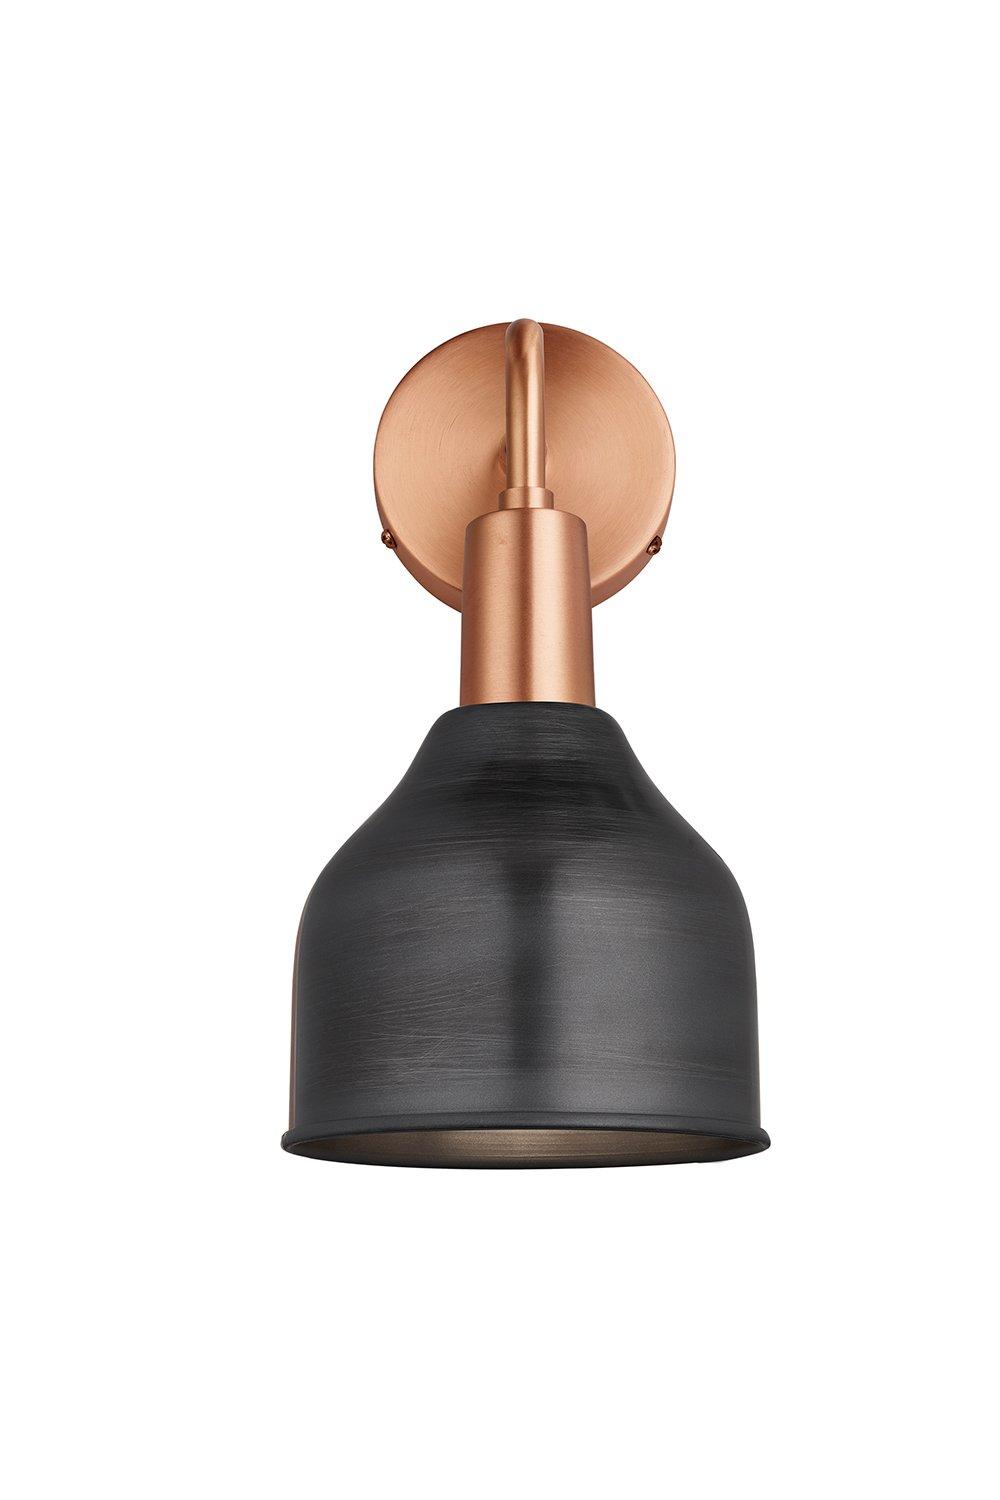 Sleek Cone Wall Light, 7 Inch, Pewter, Copper Holder